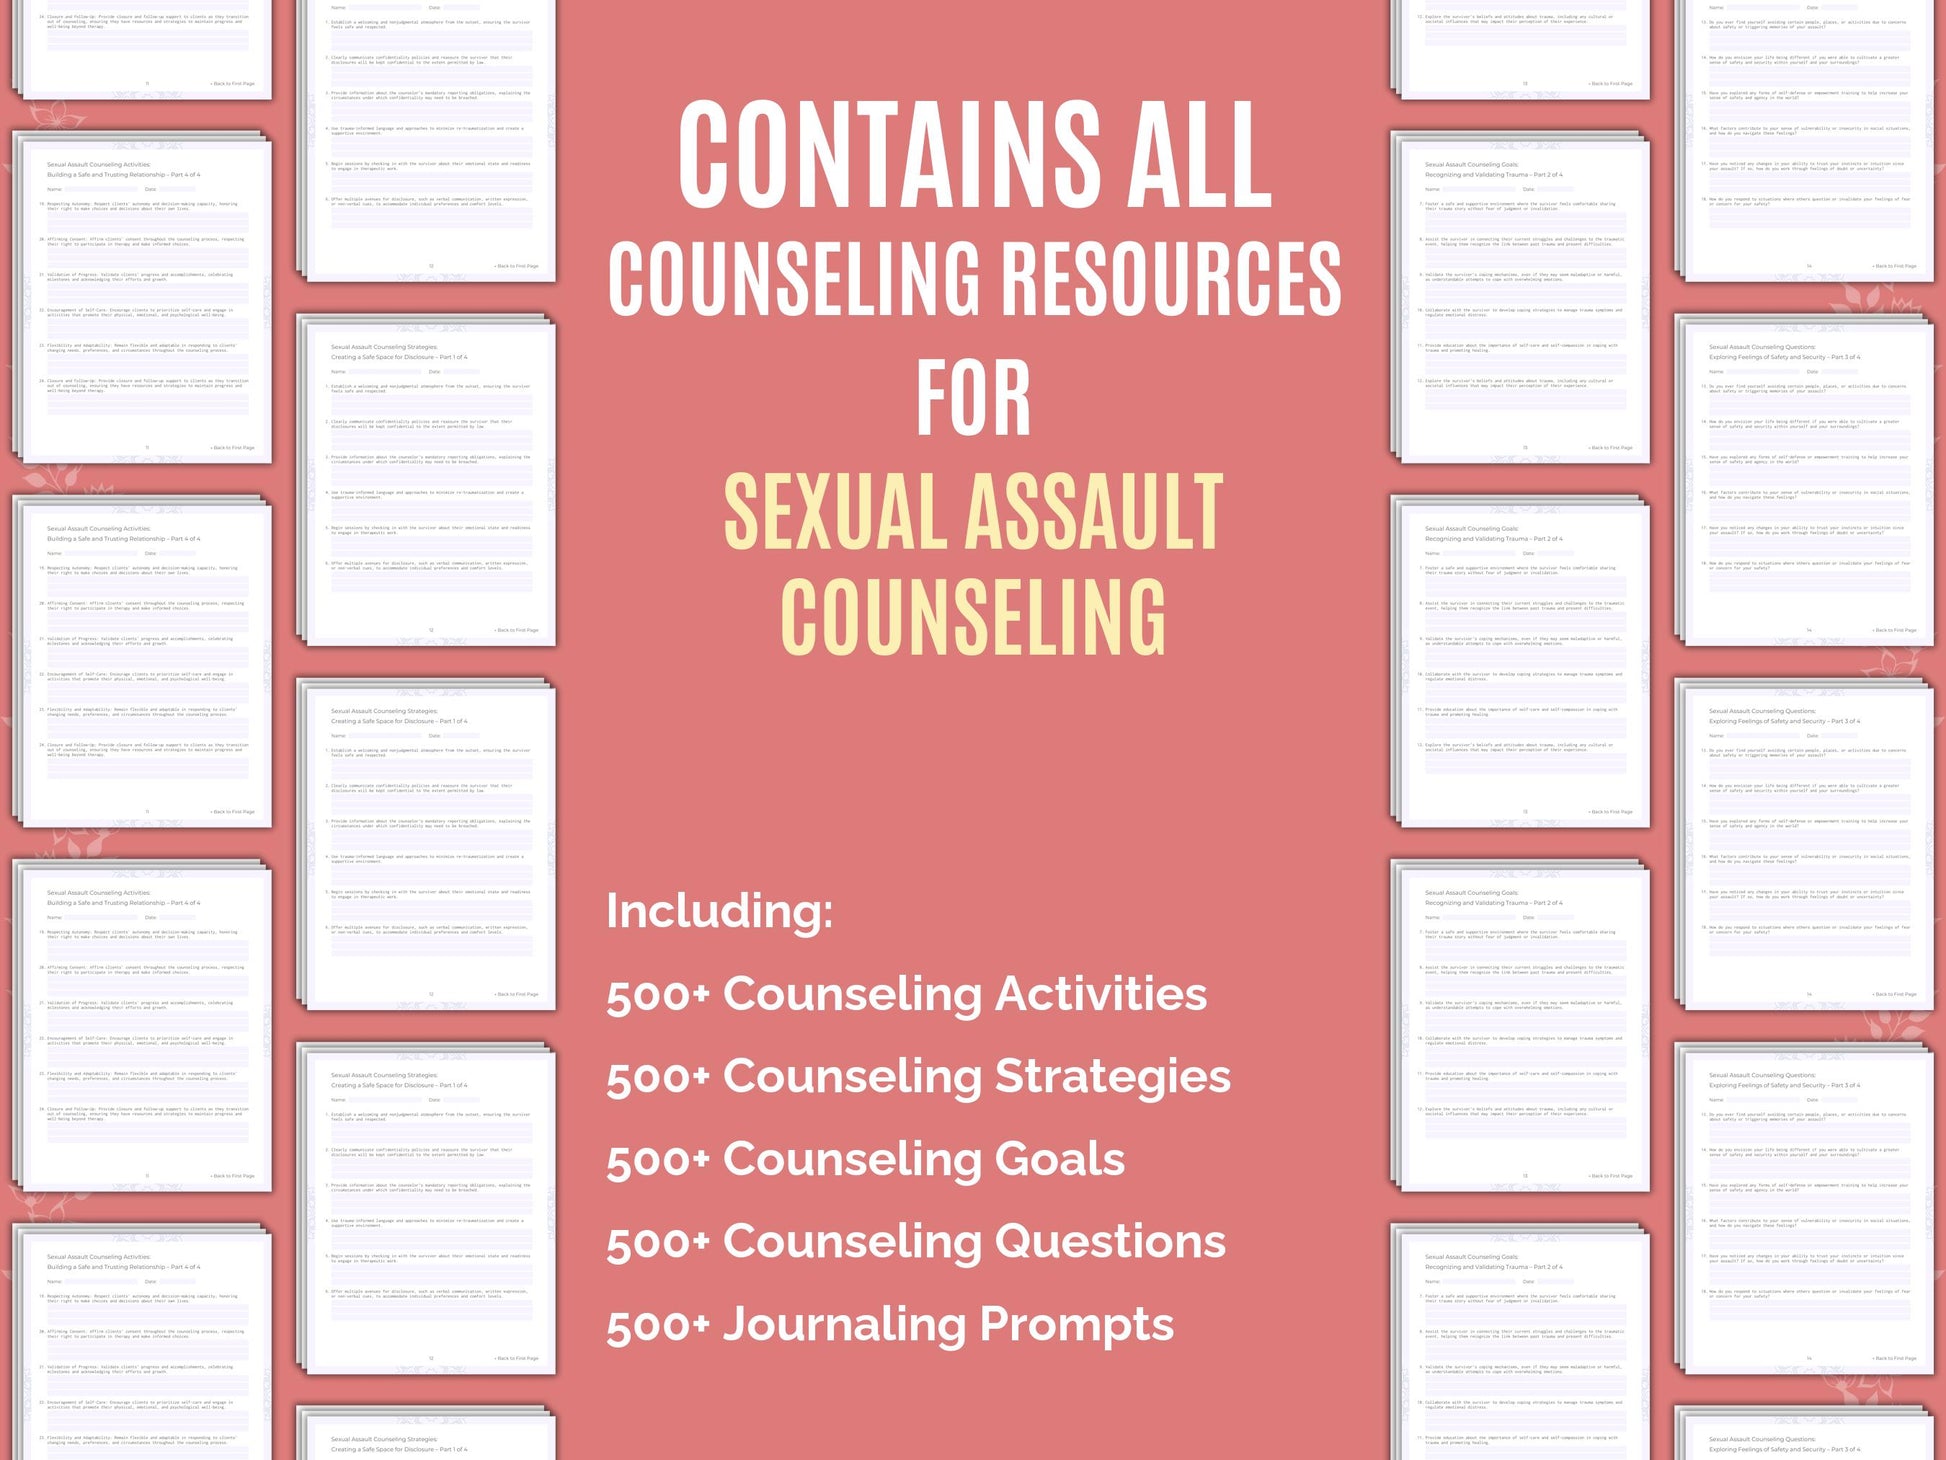 Worksheet, Sexual Assault Idea, Content, Sexual Assault Tool, Counseling, Sexual Assault, Resource, Workbook, Counselor, Mental Health, Therapy, Template, Therapist